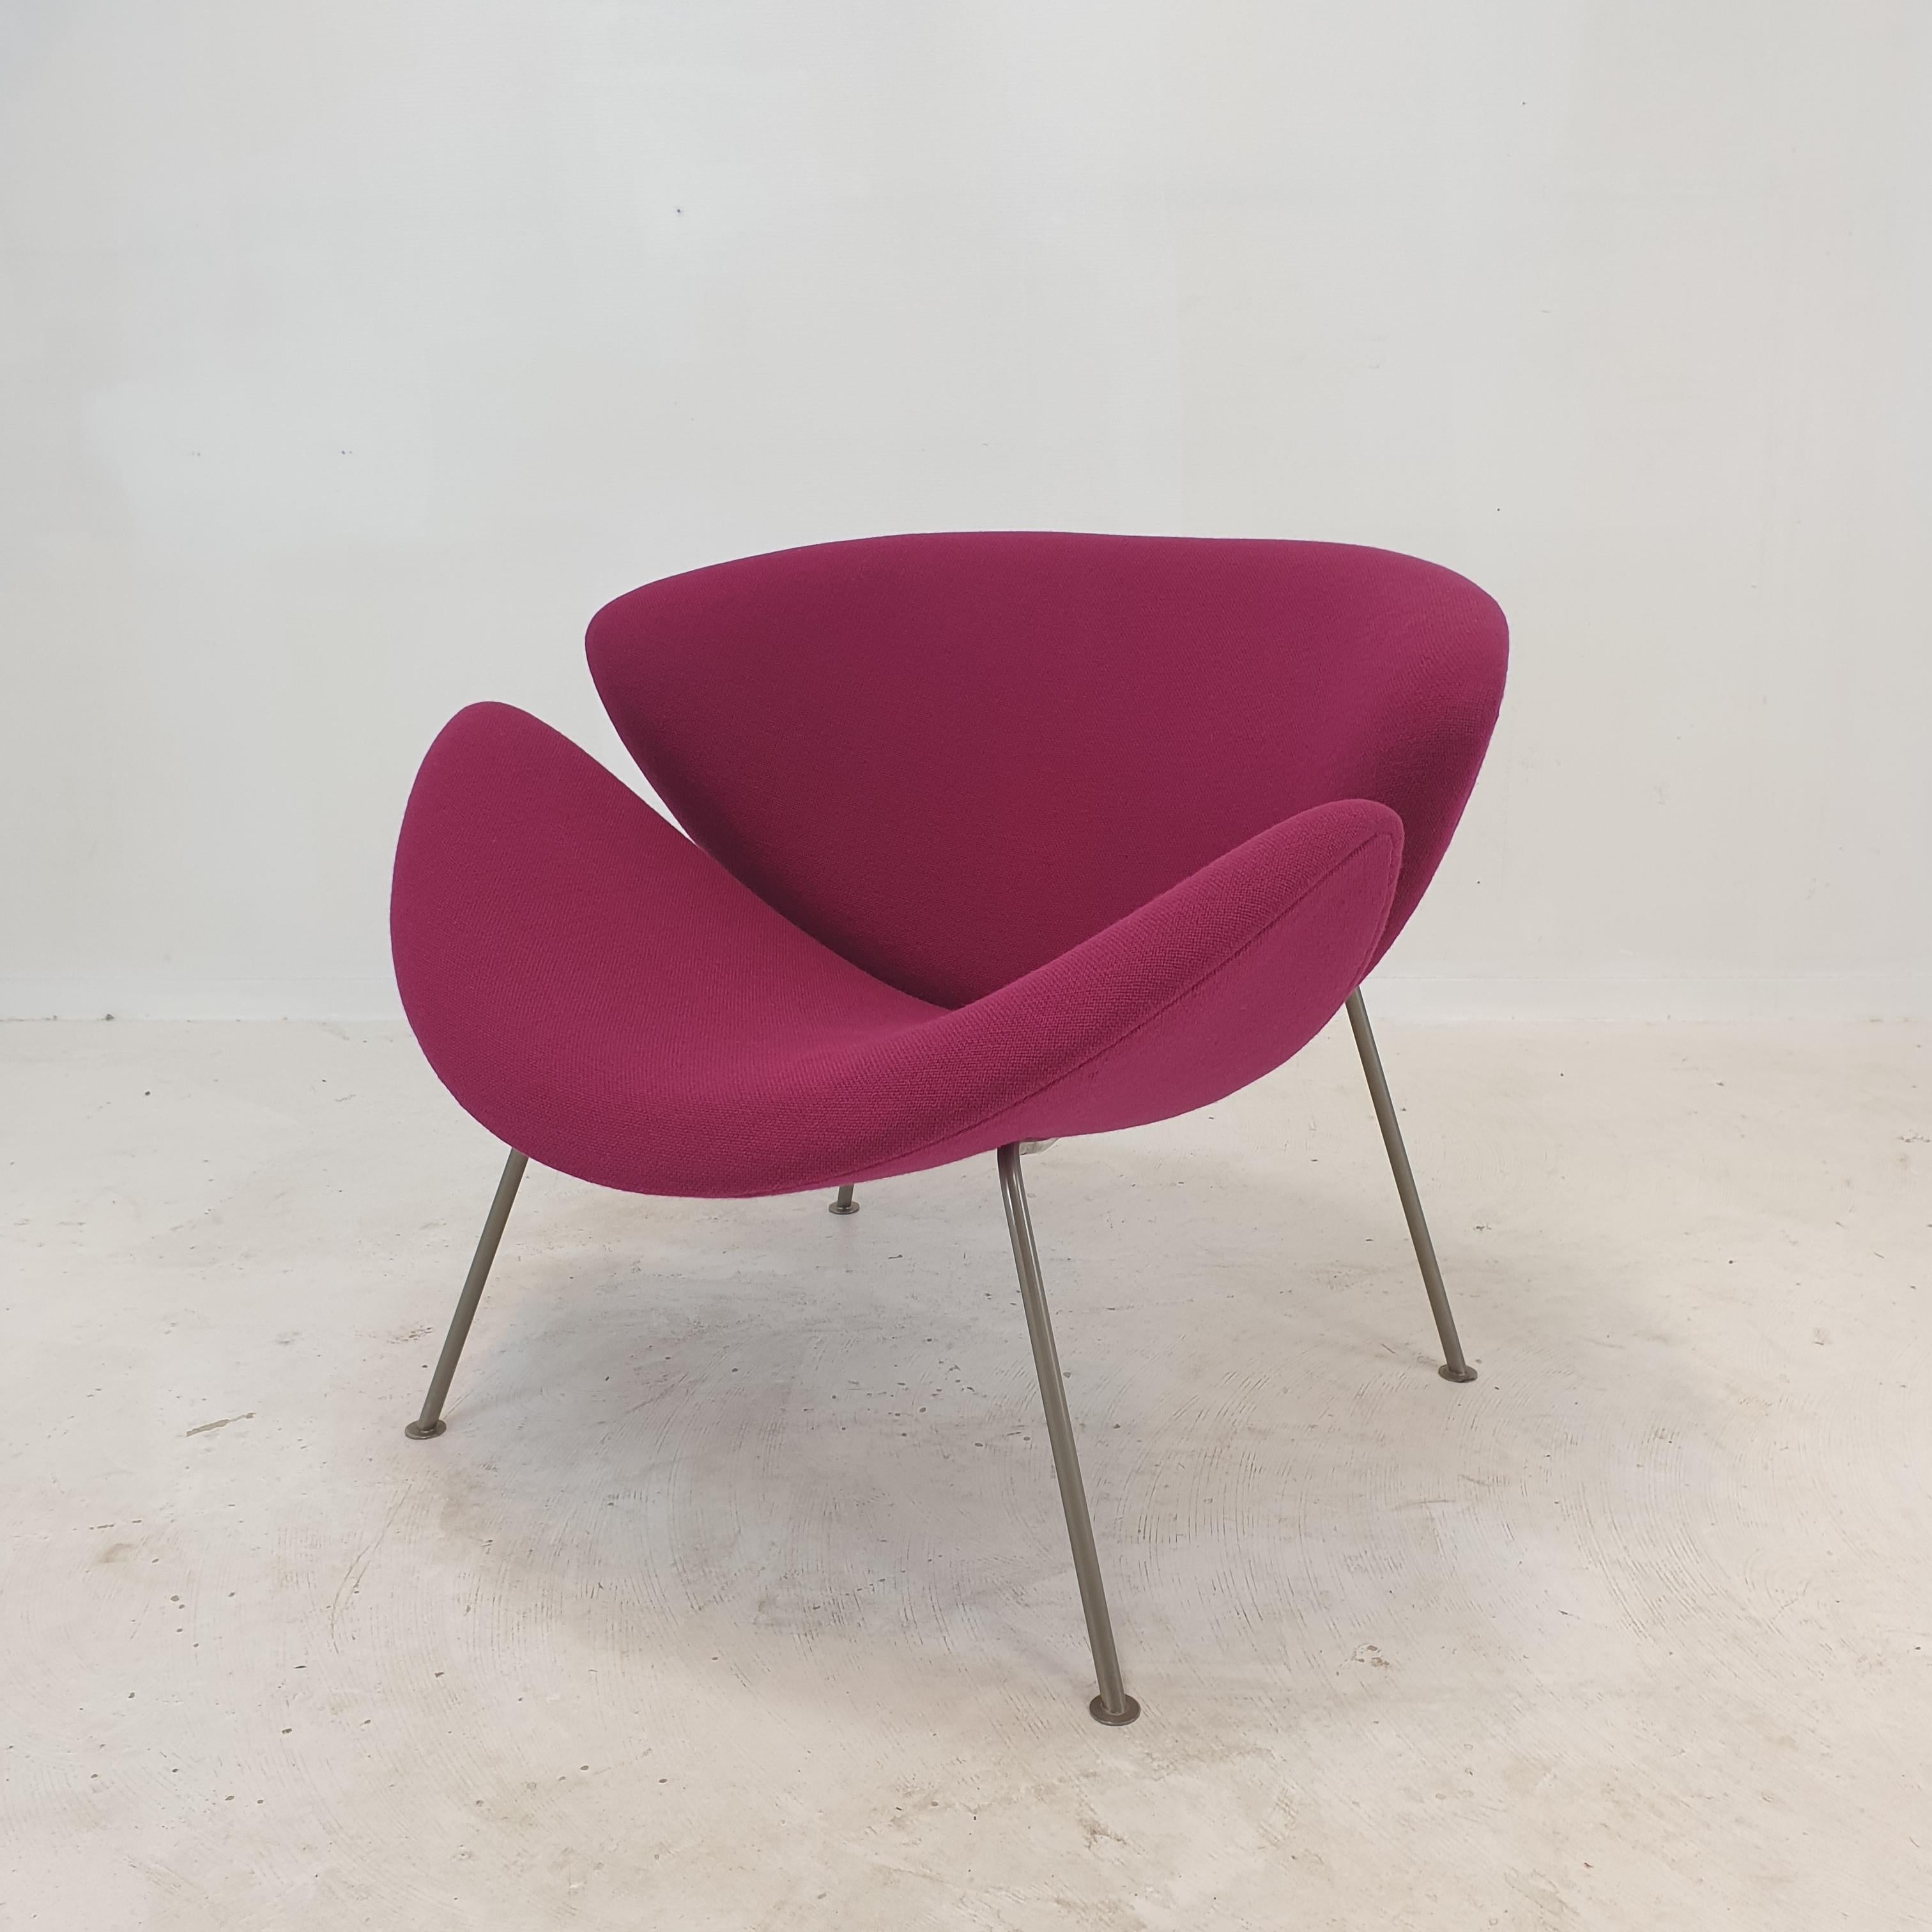 The famous Artifort orange slice chair by Pierre Paulin, designed in the 60's.
This is an original and early edition chair with nickel legs, produced in the 60's.

It is a cute and very comfortable chair.

The fuchsia wool fabric is in good